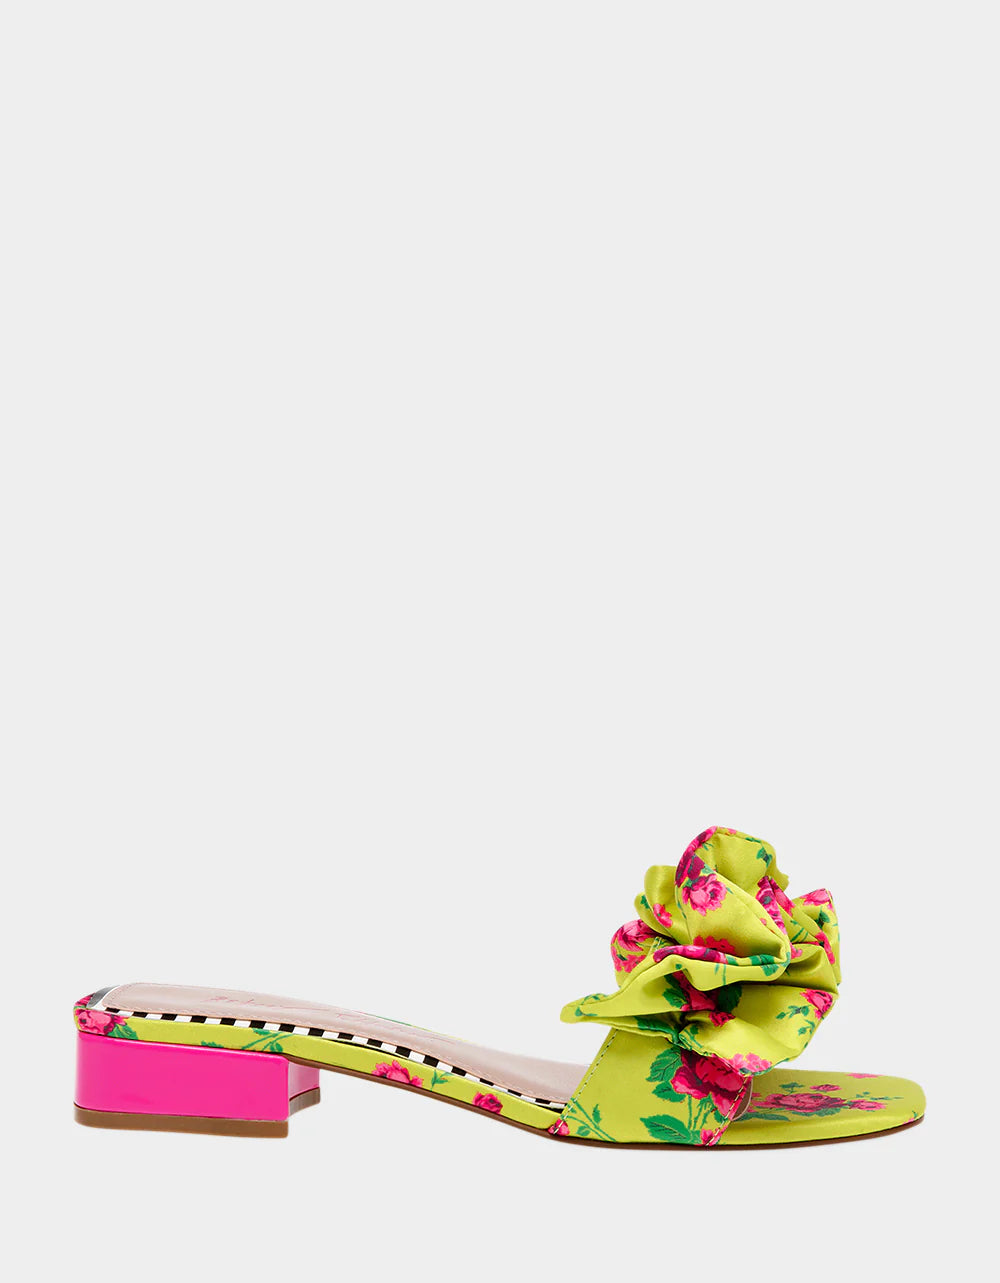 BETSEY JOHNSON CITRON FLORAL SLIPPERS